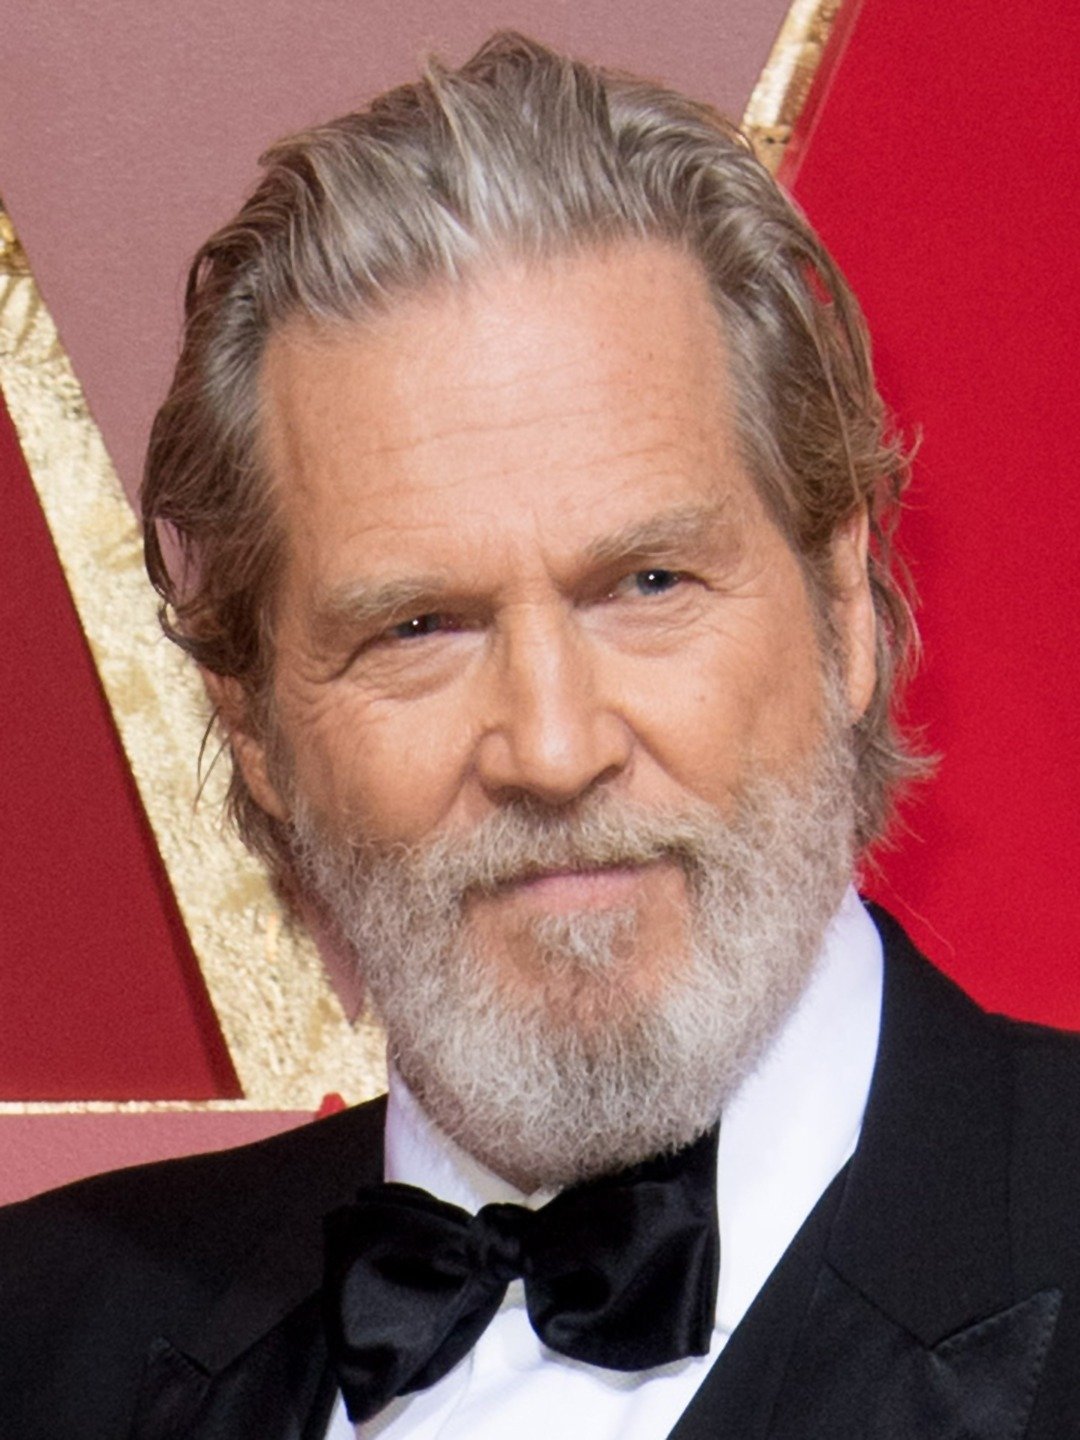 Jeff Bridges to Star in FX CIA Drama The Old Man  The Hollywood Reporter